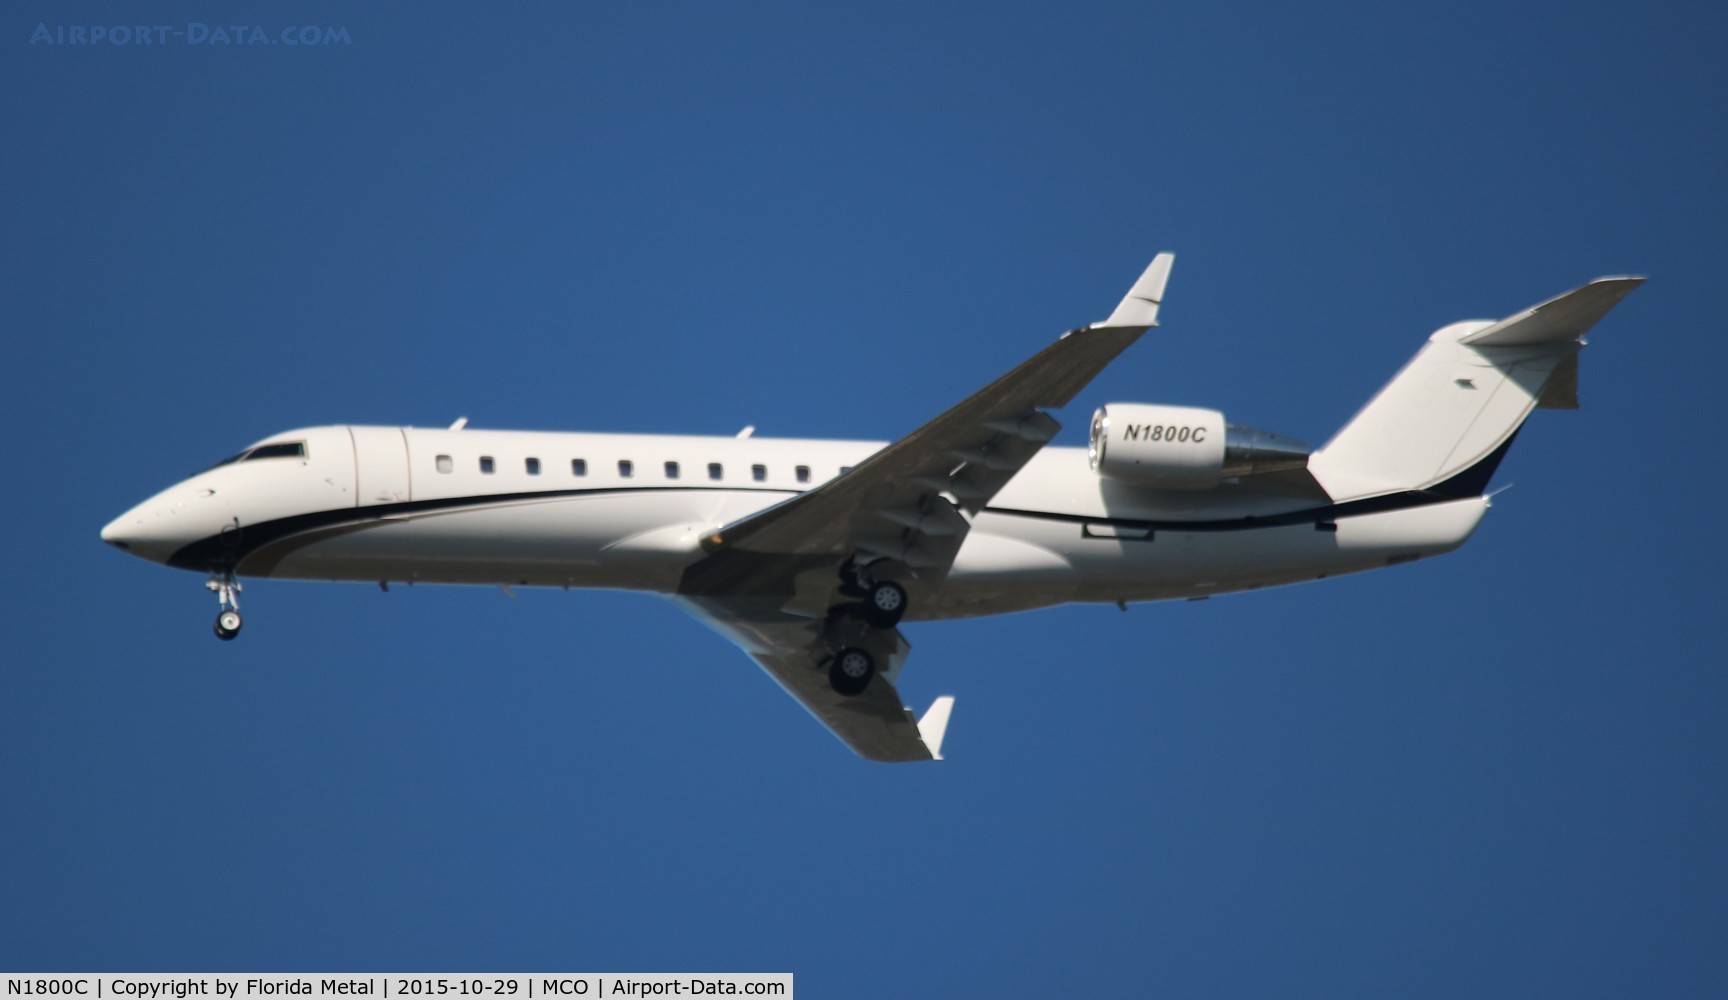 N1800C, 1999 Bombardier Challenger 601-3A (CL-600-2B16) C/N 7351, Challenger 850